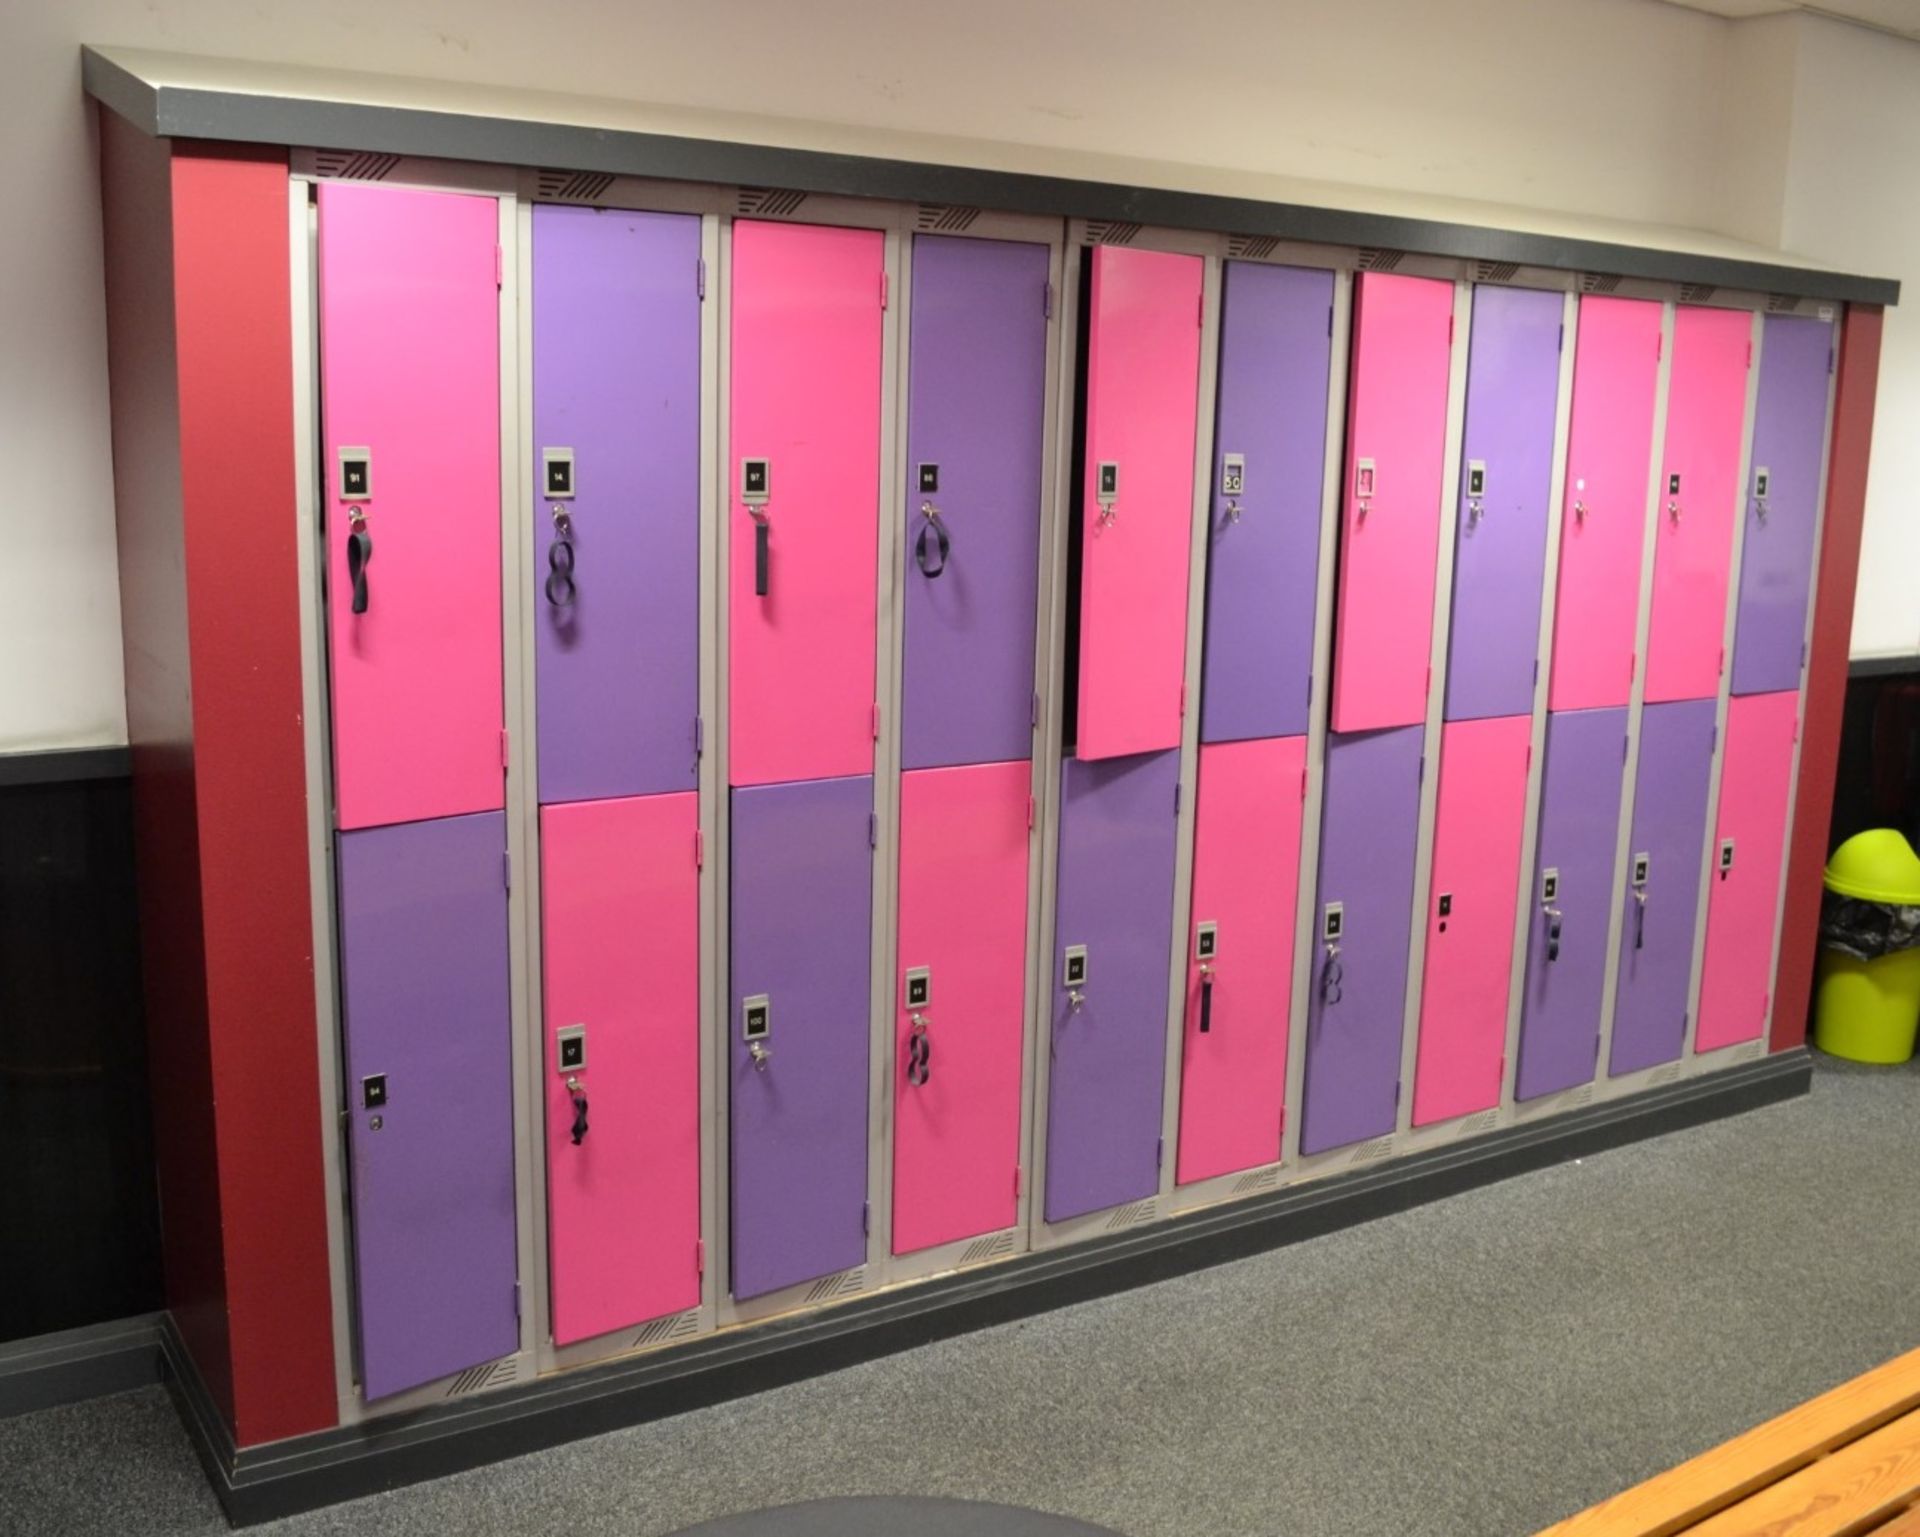 22 x Steel Changing Room Lockers in Purple and Pink - Some With Keys and Some Without -